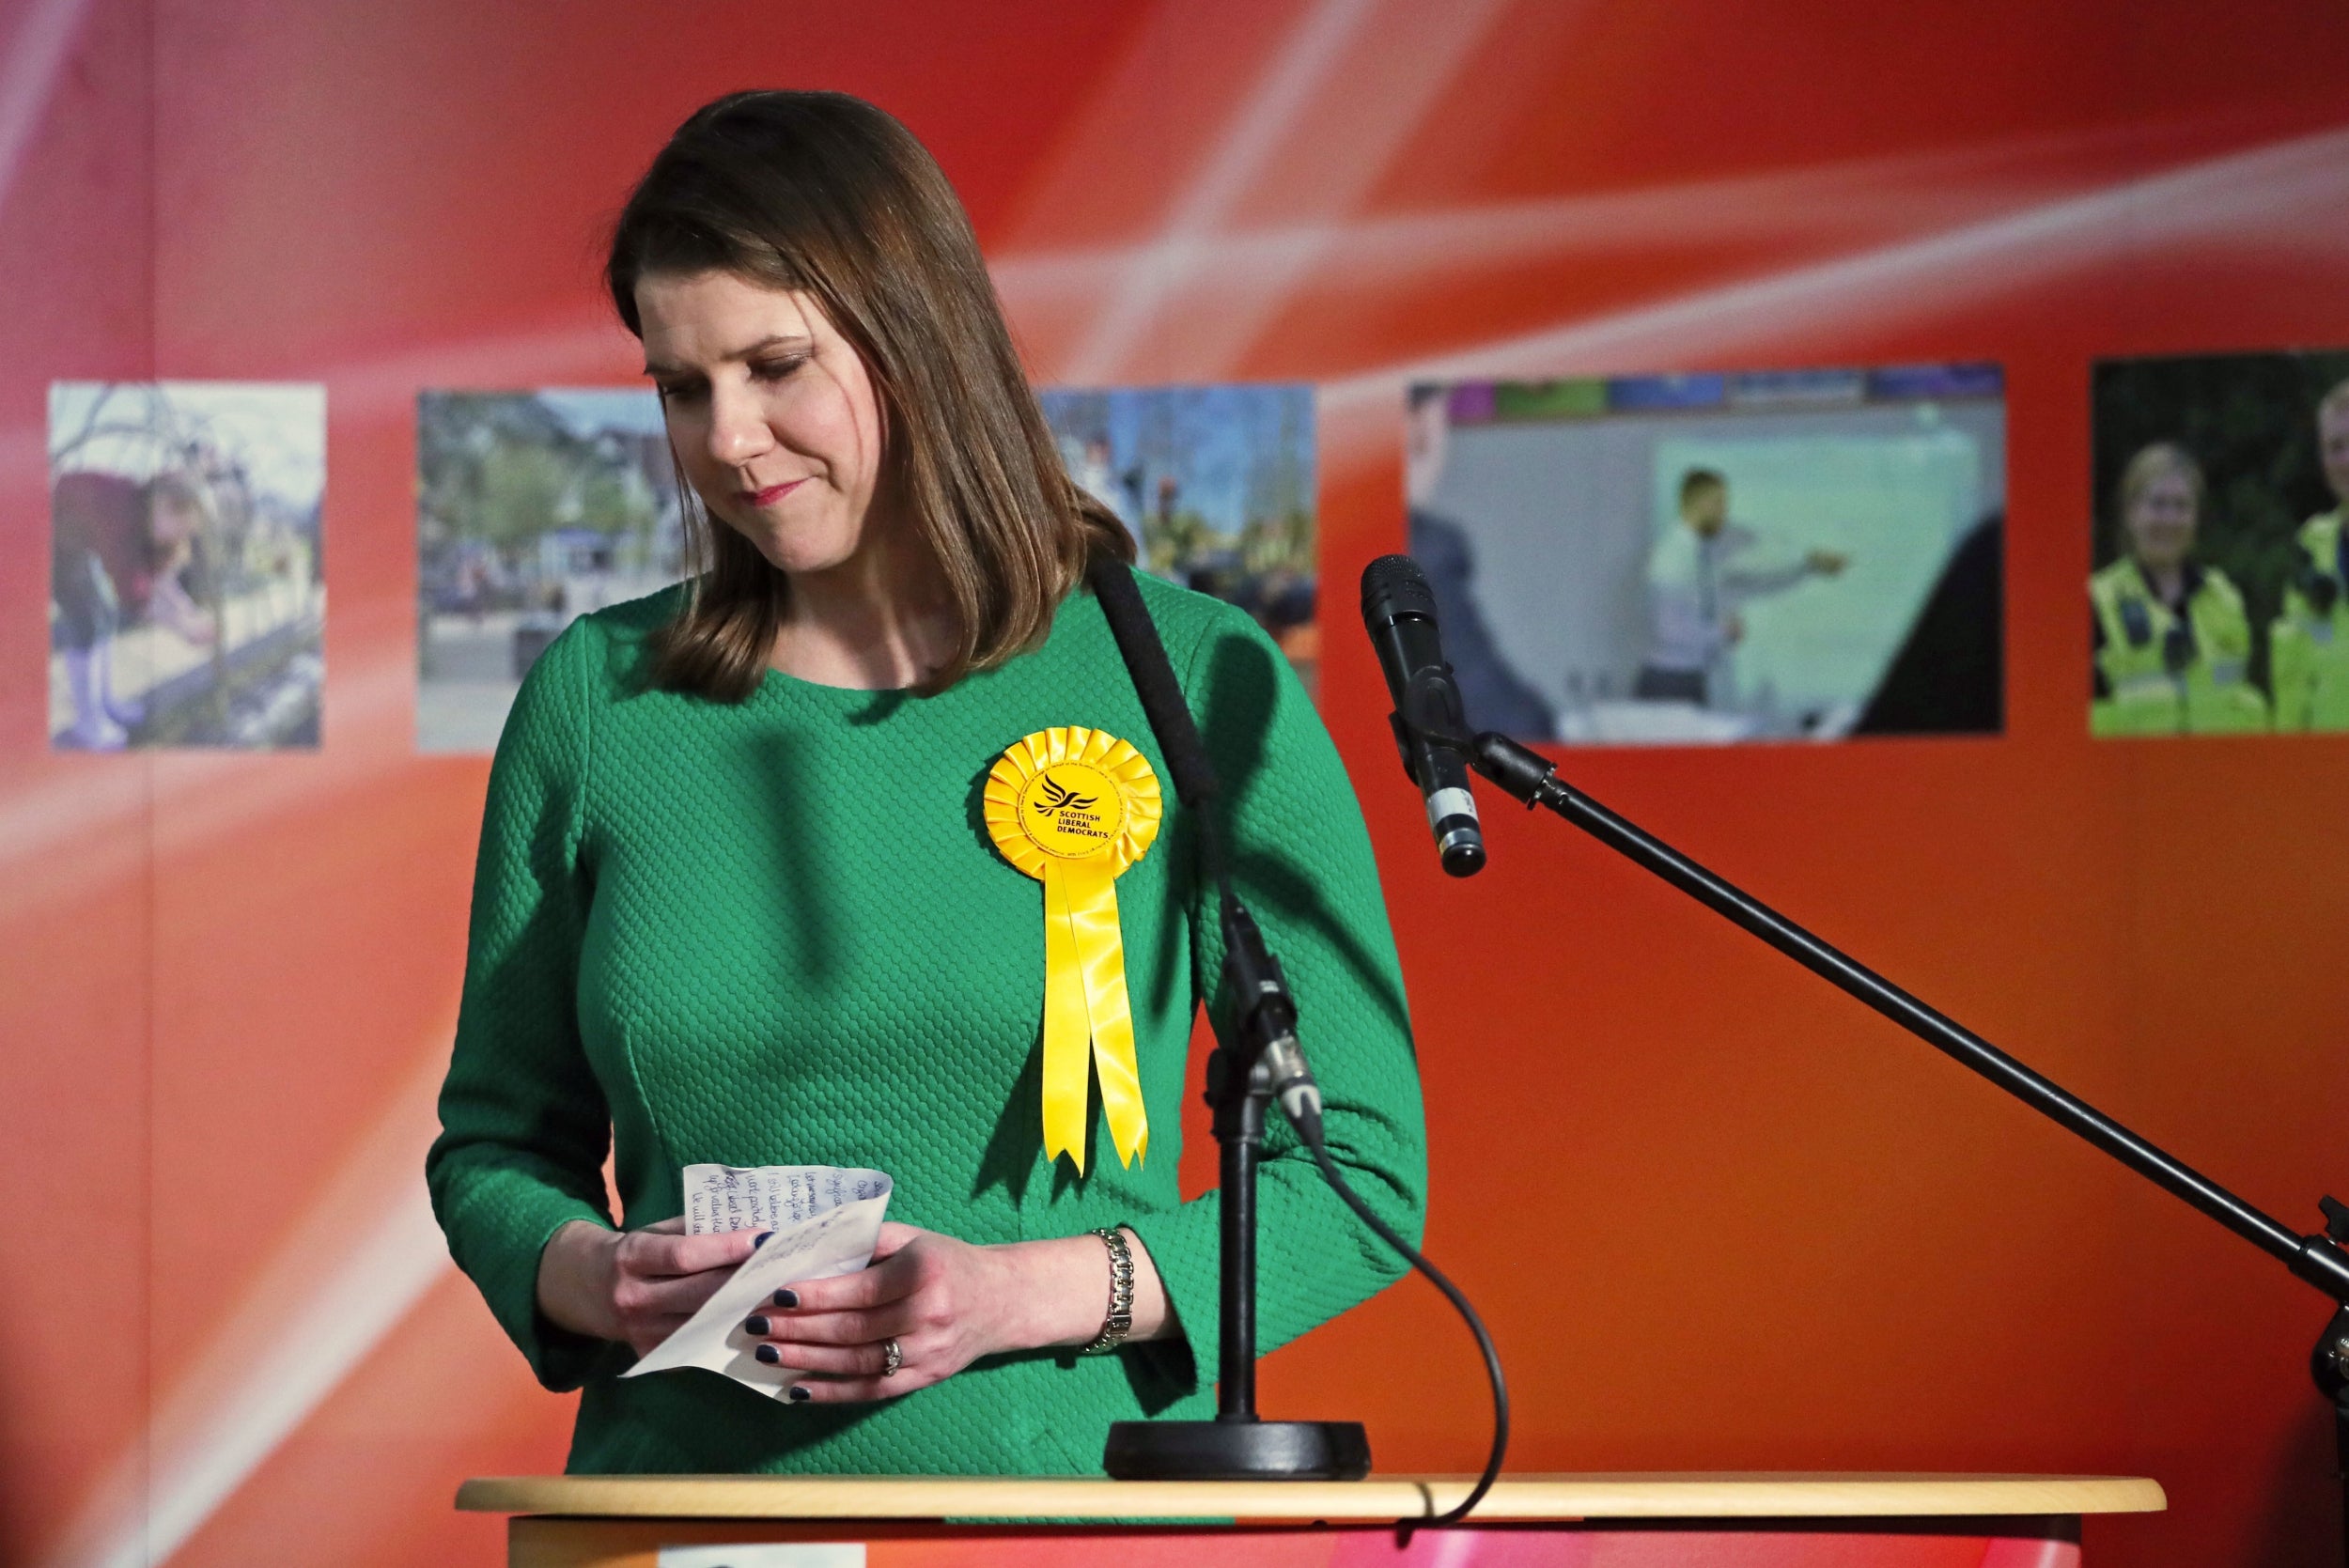 Jo Swinson's blunders made one former Lib Dem member relieved that he was no longer card-carrying